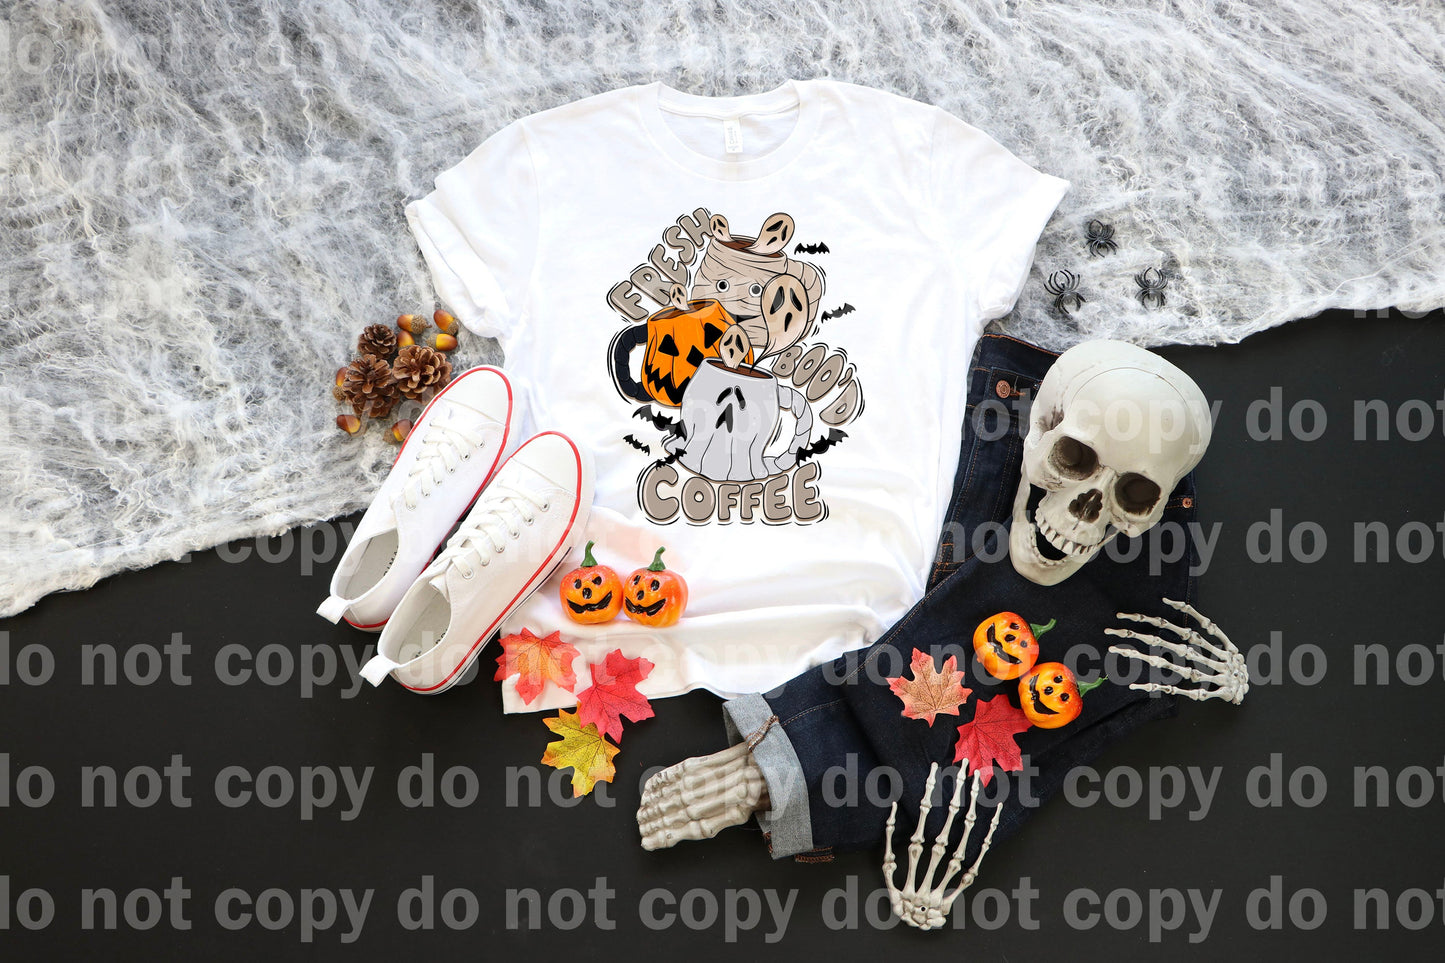 Fresh Boo'd Coffee with Optional Sleeve Design Dream Print or Sublimation Print